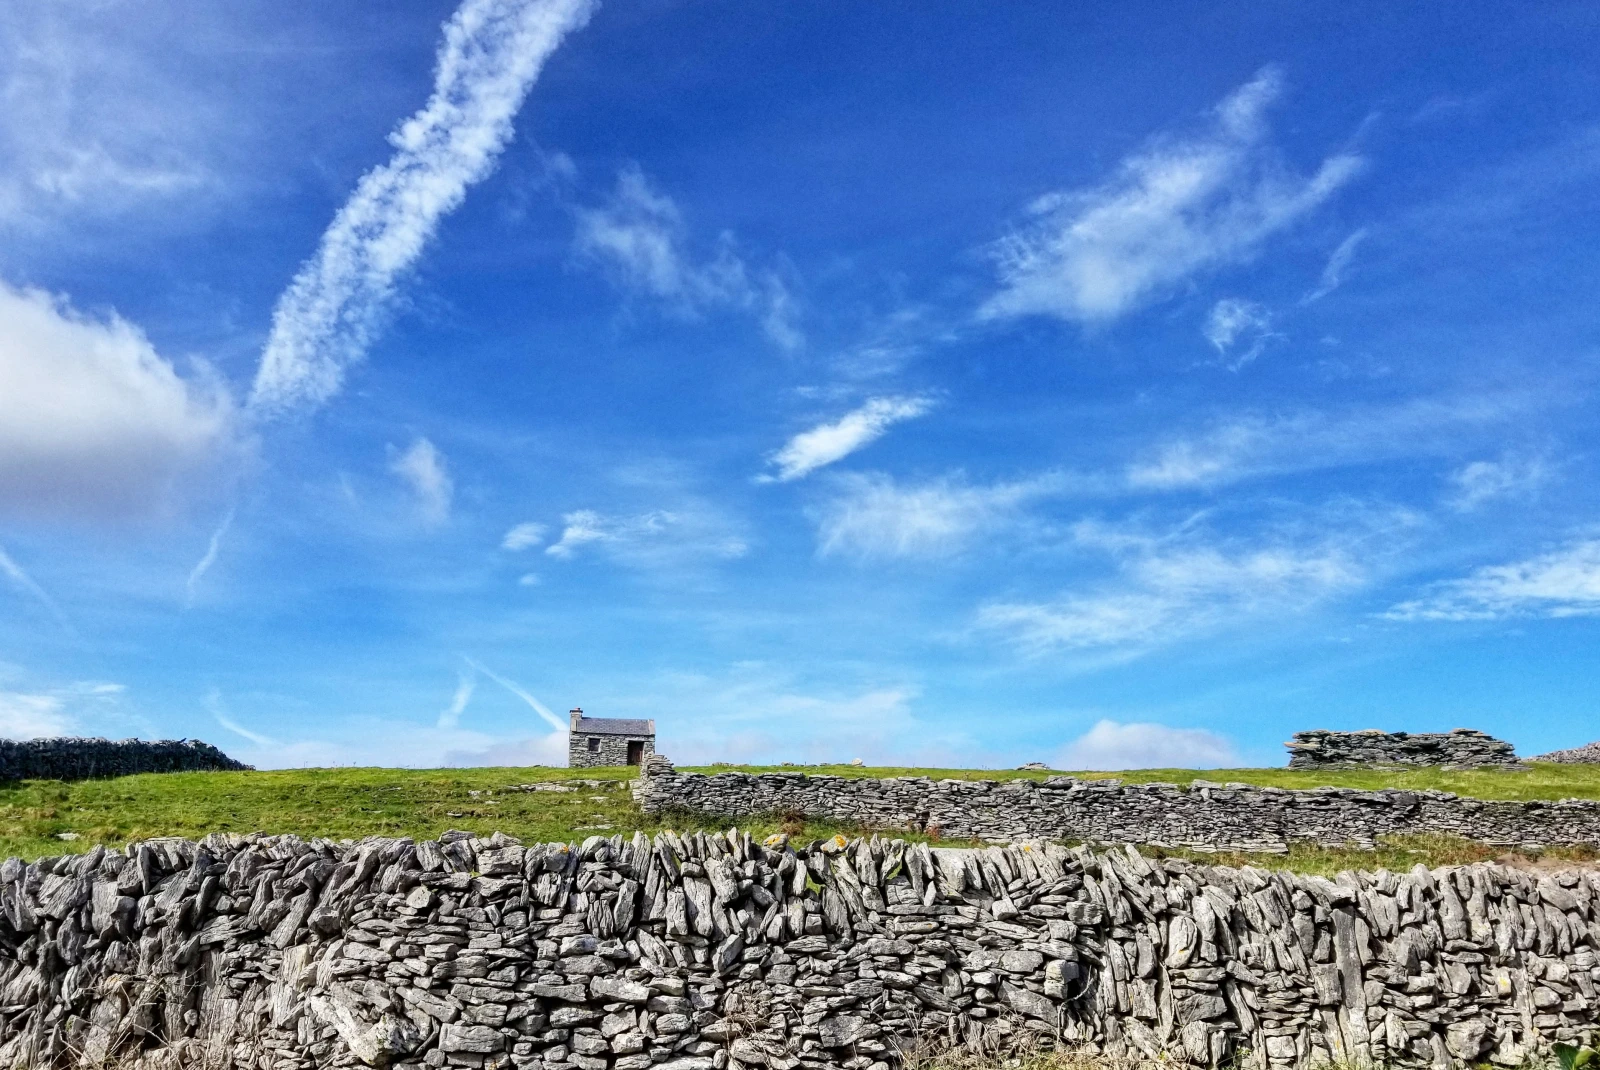 Stone wall on grassy field with blue skies during daytime